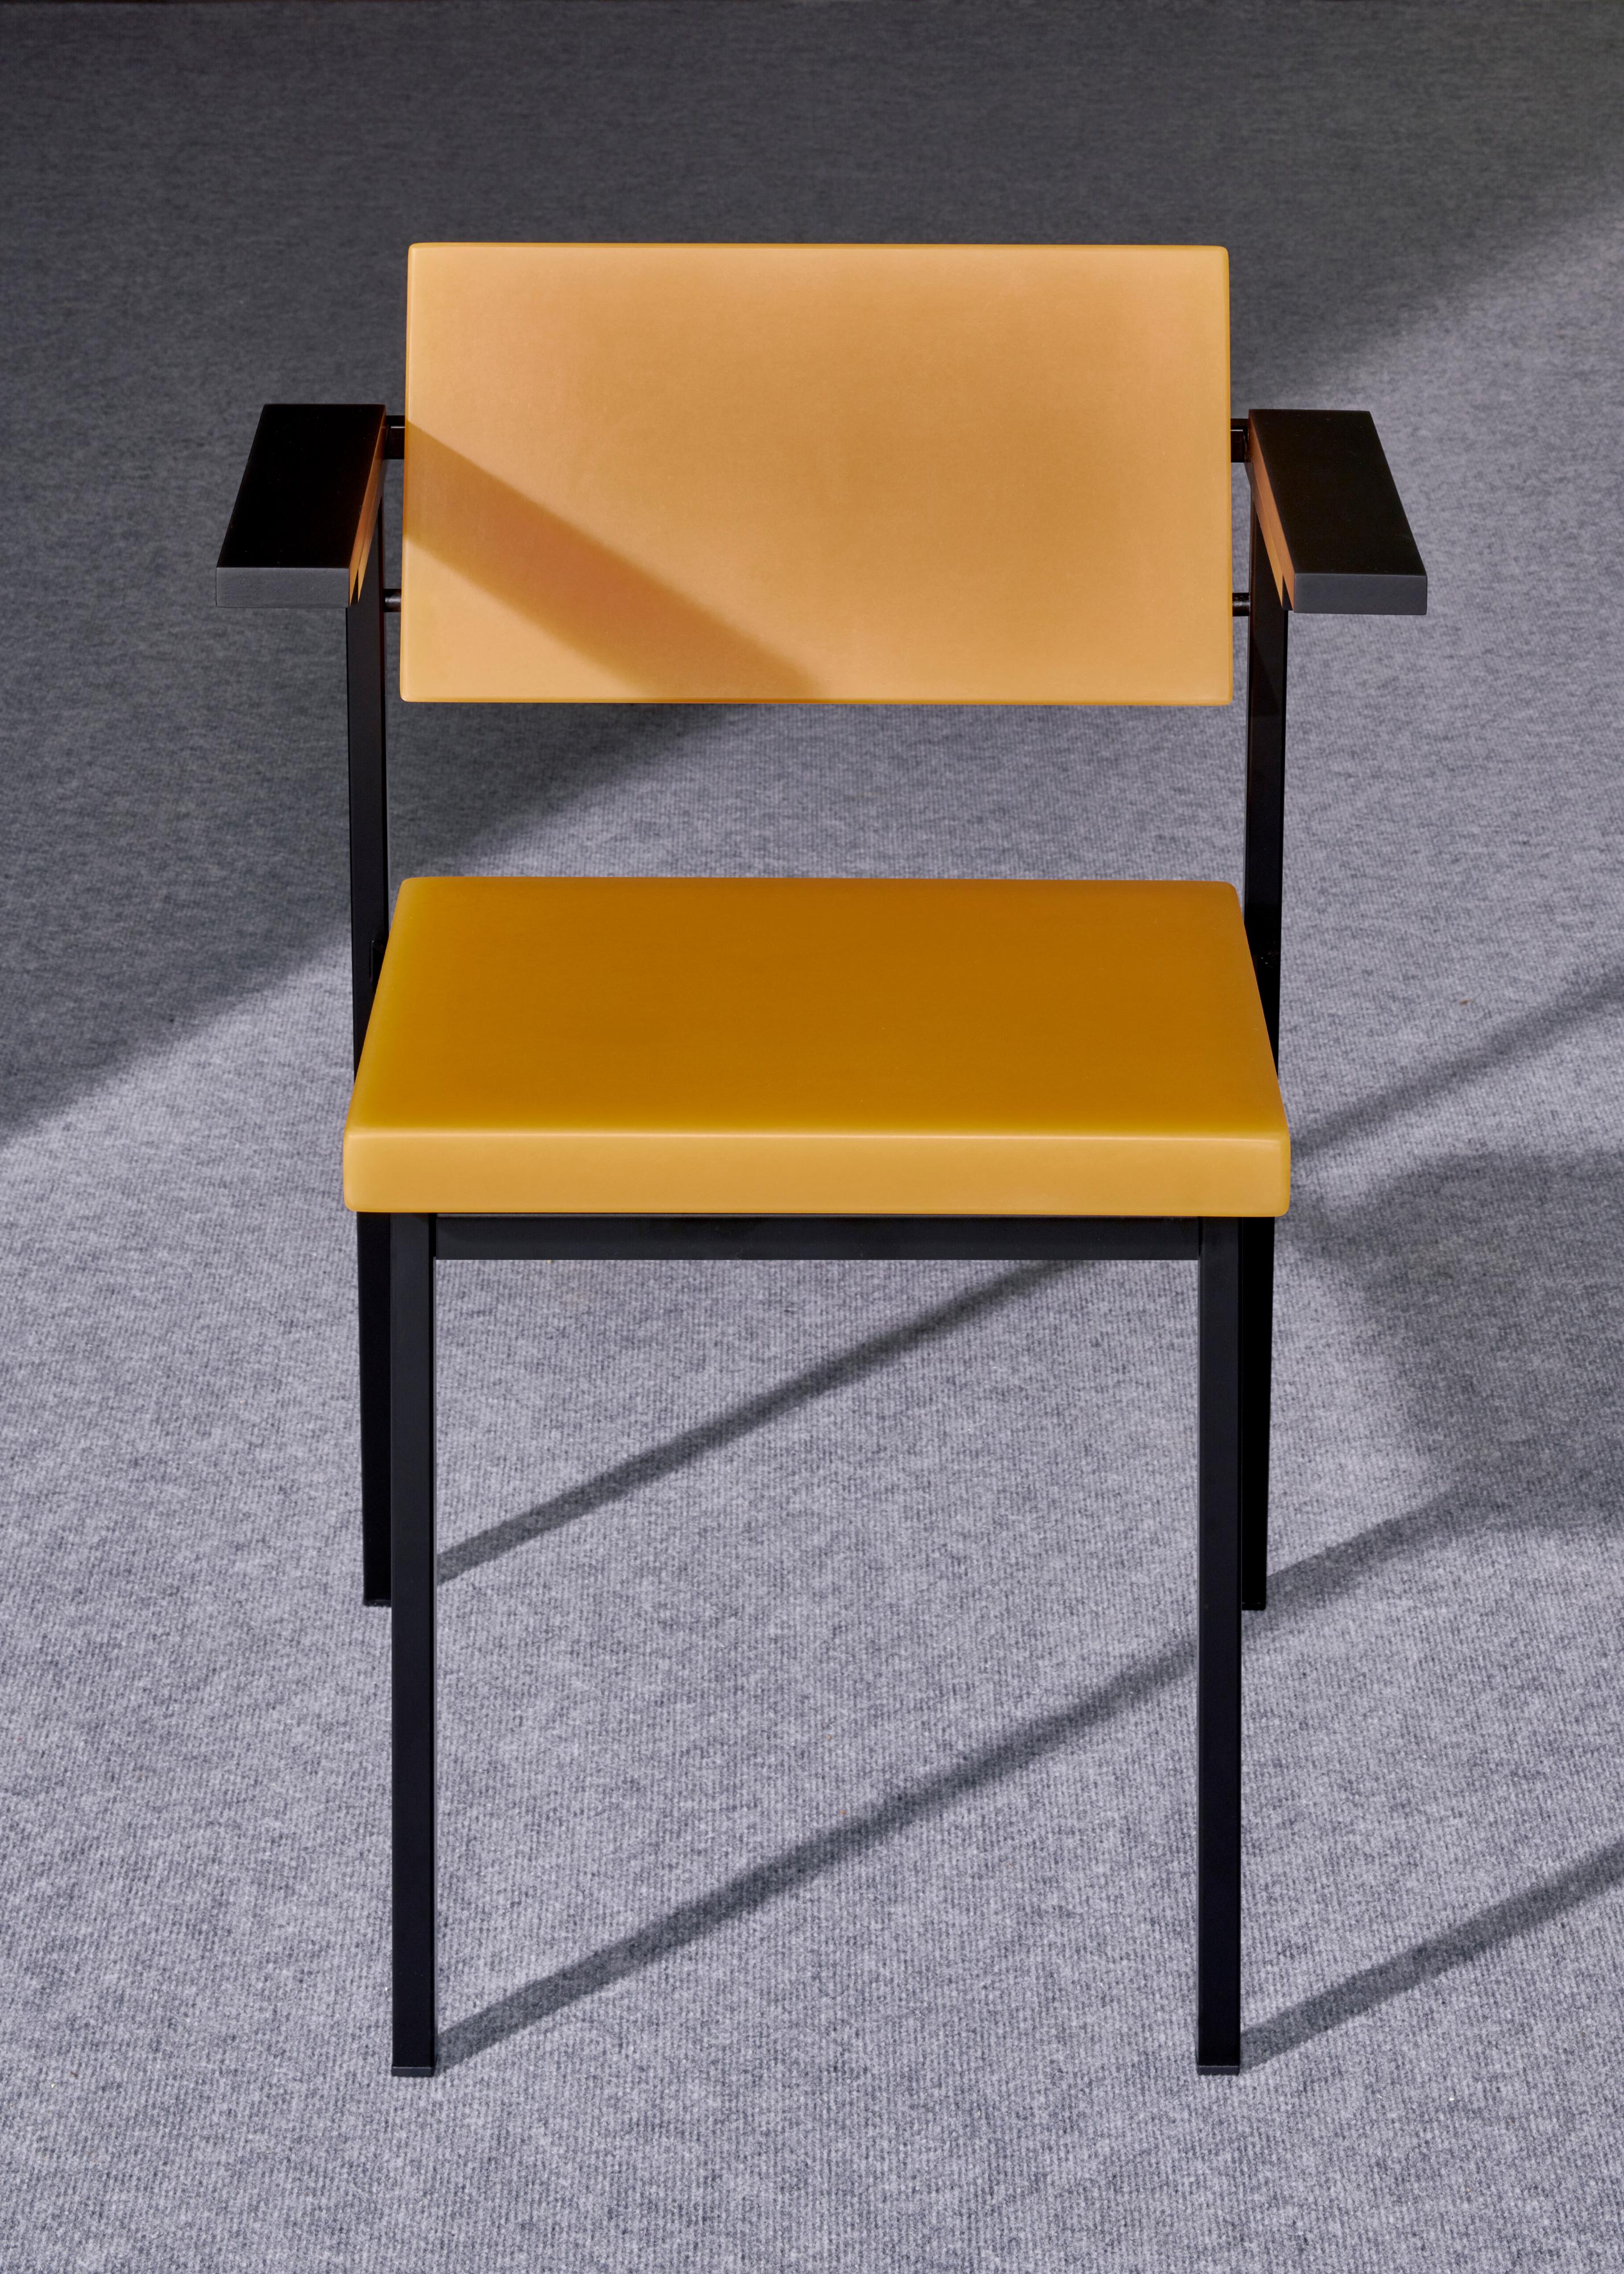 Contemporary Resin SE69 Chair 2019 by Sabine Marcelis In New Condition For Sale In Copenhagen, DK